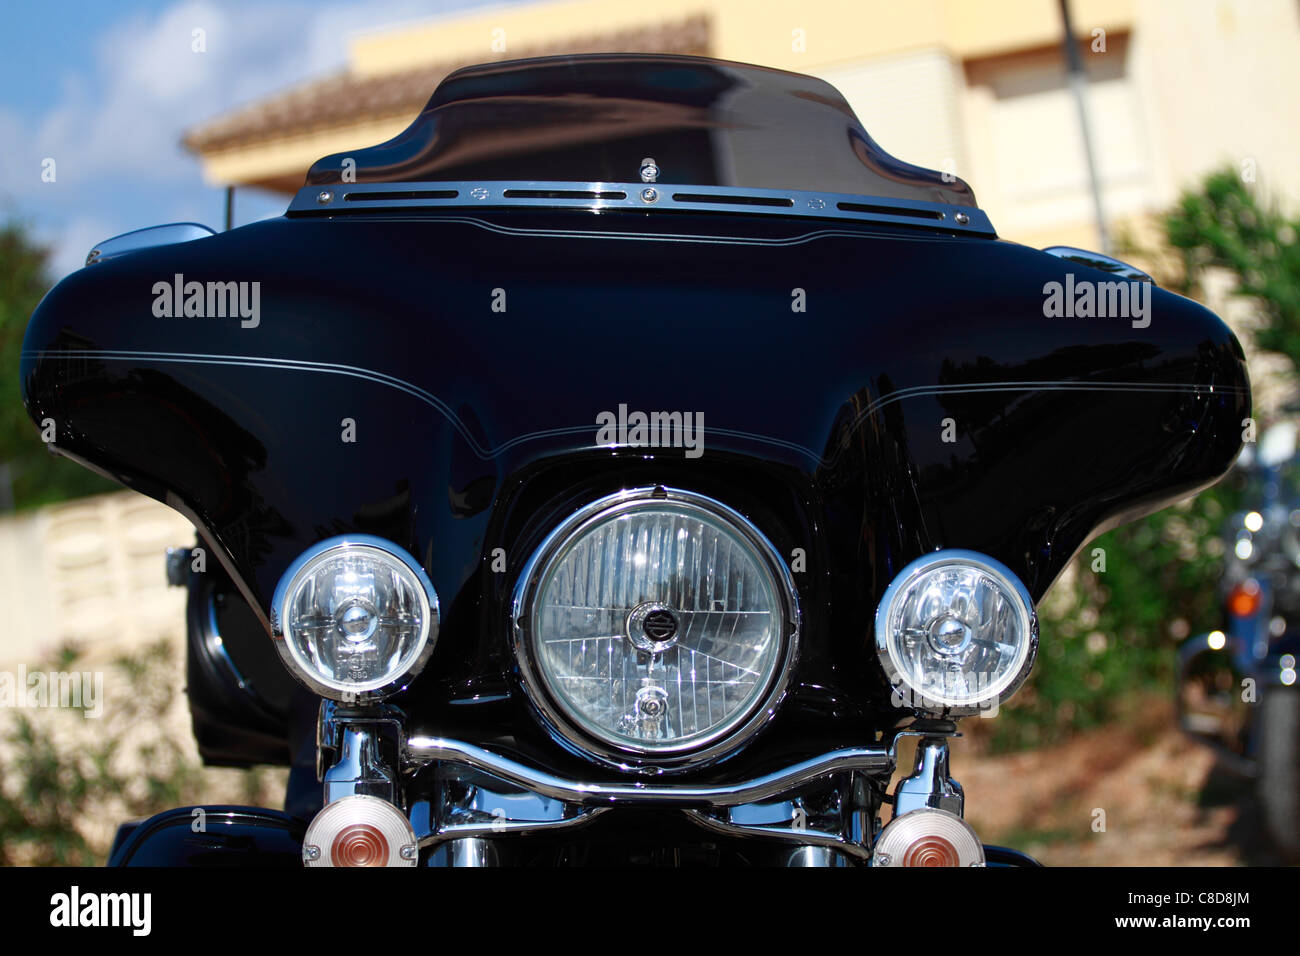 Harley Davidson Electra Glide High Resolution Stock Photography And Images Alamy